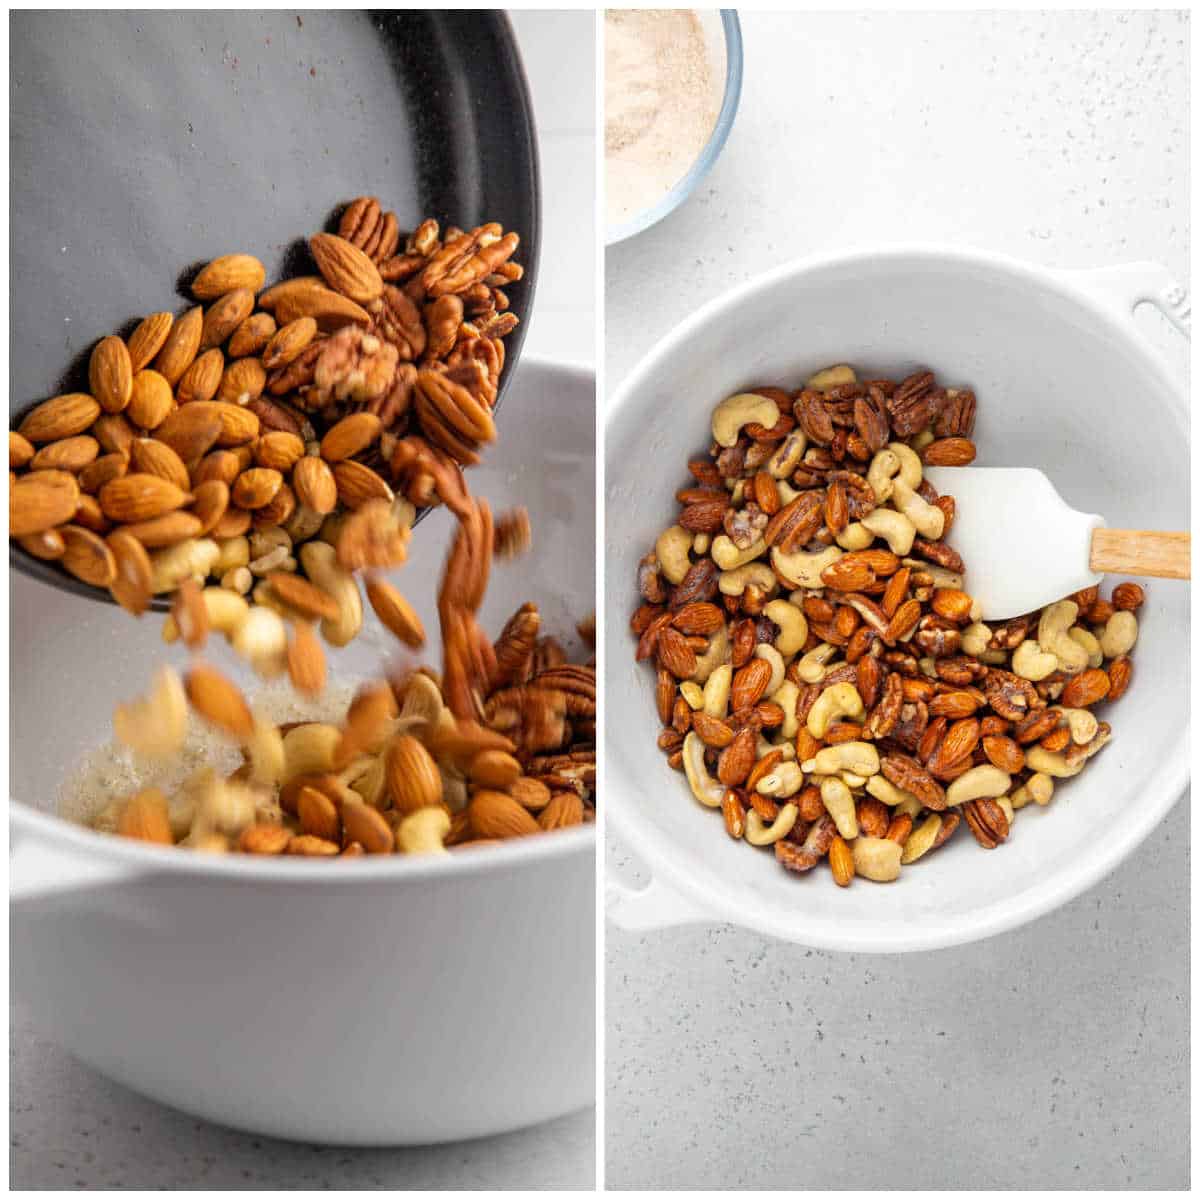 Steps to make crockpot candied nuts.